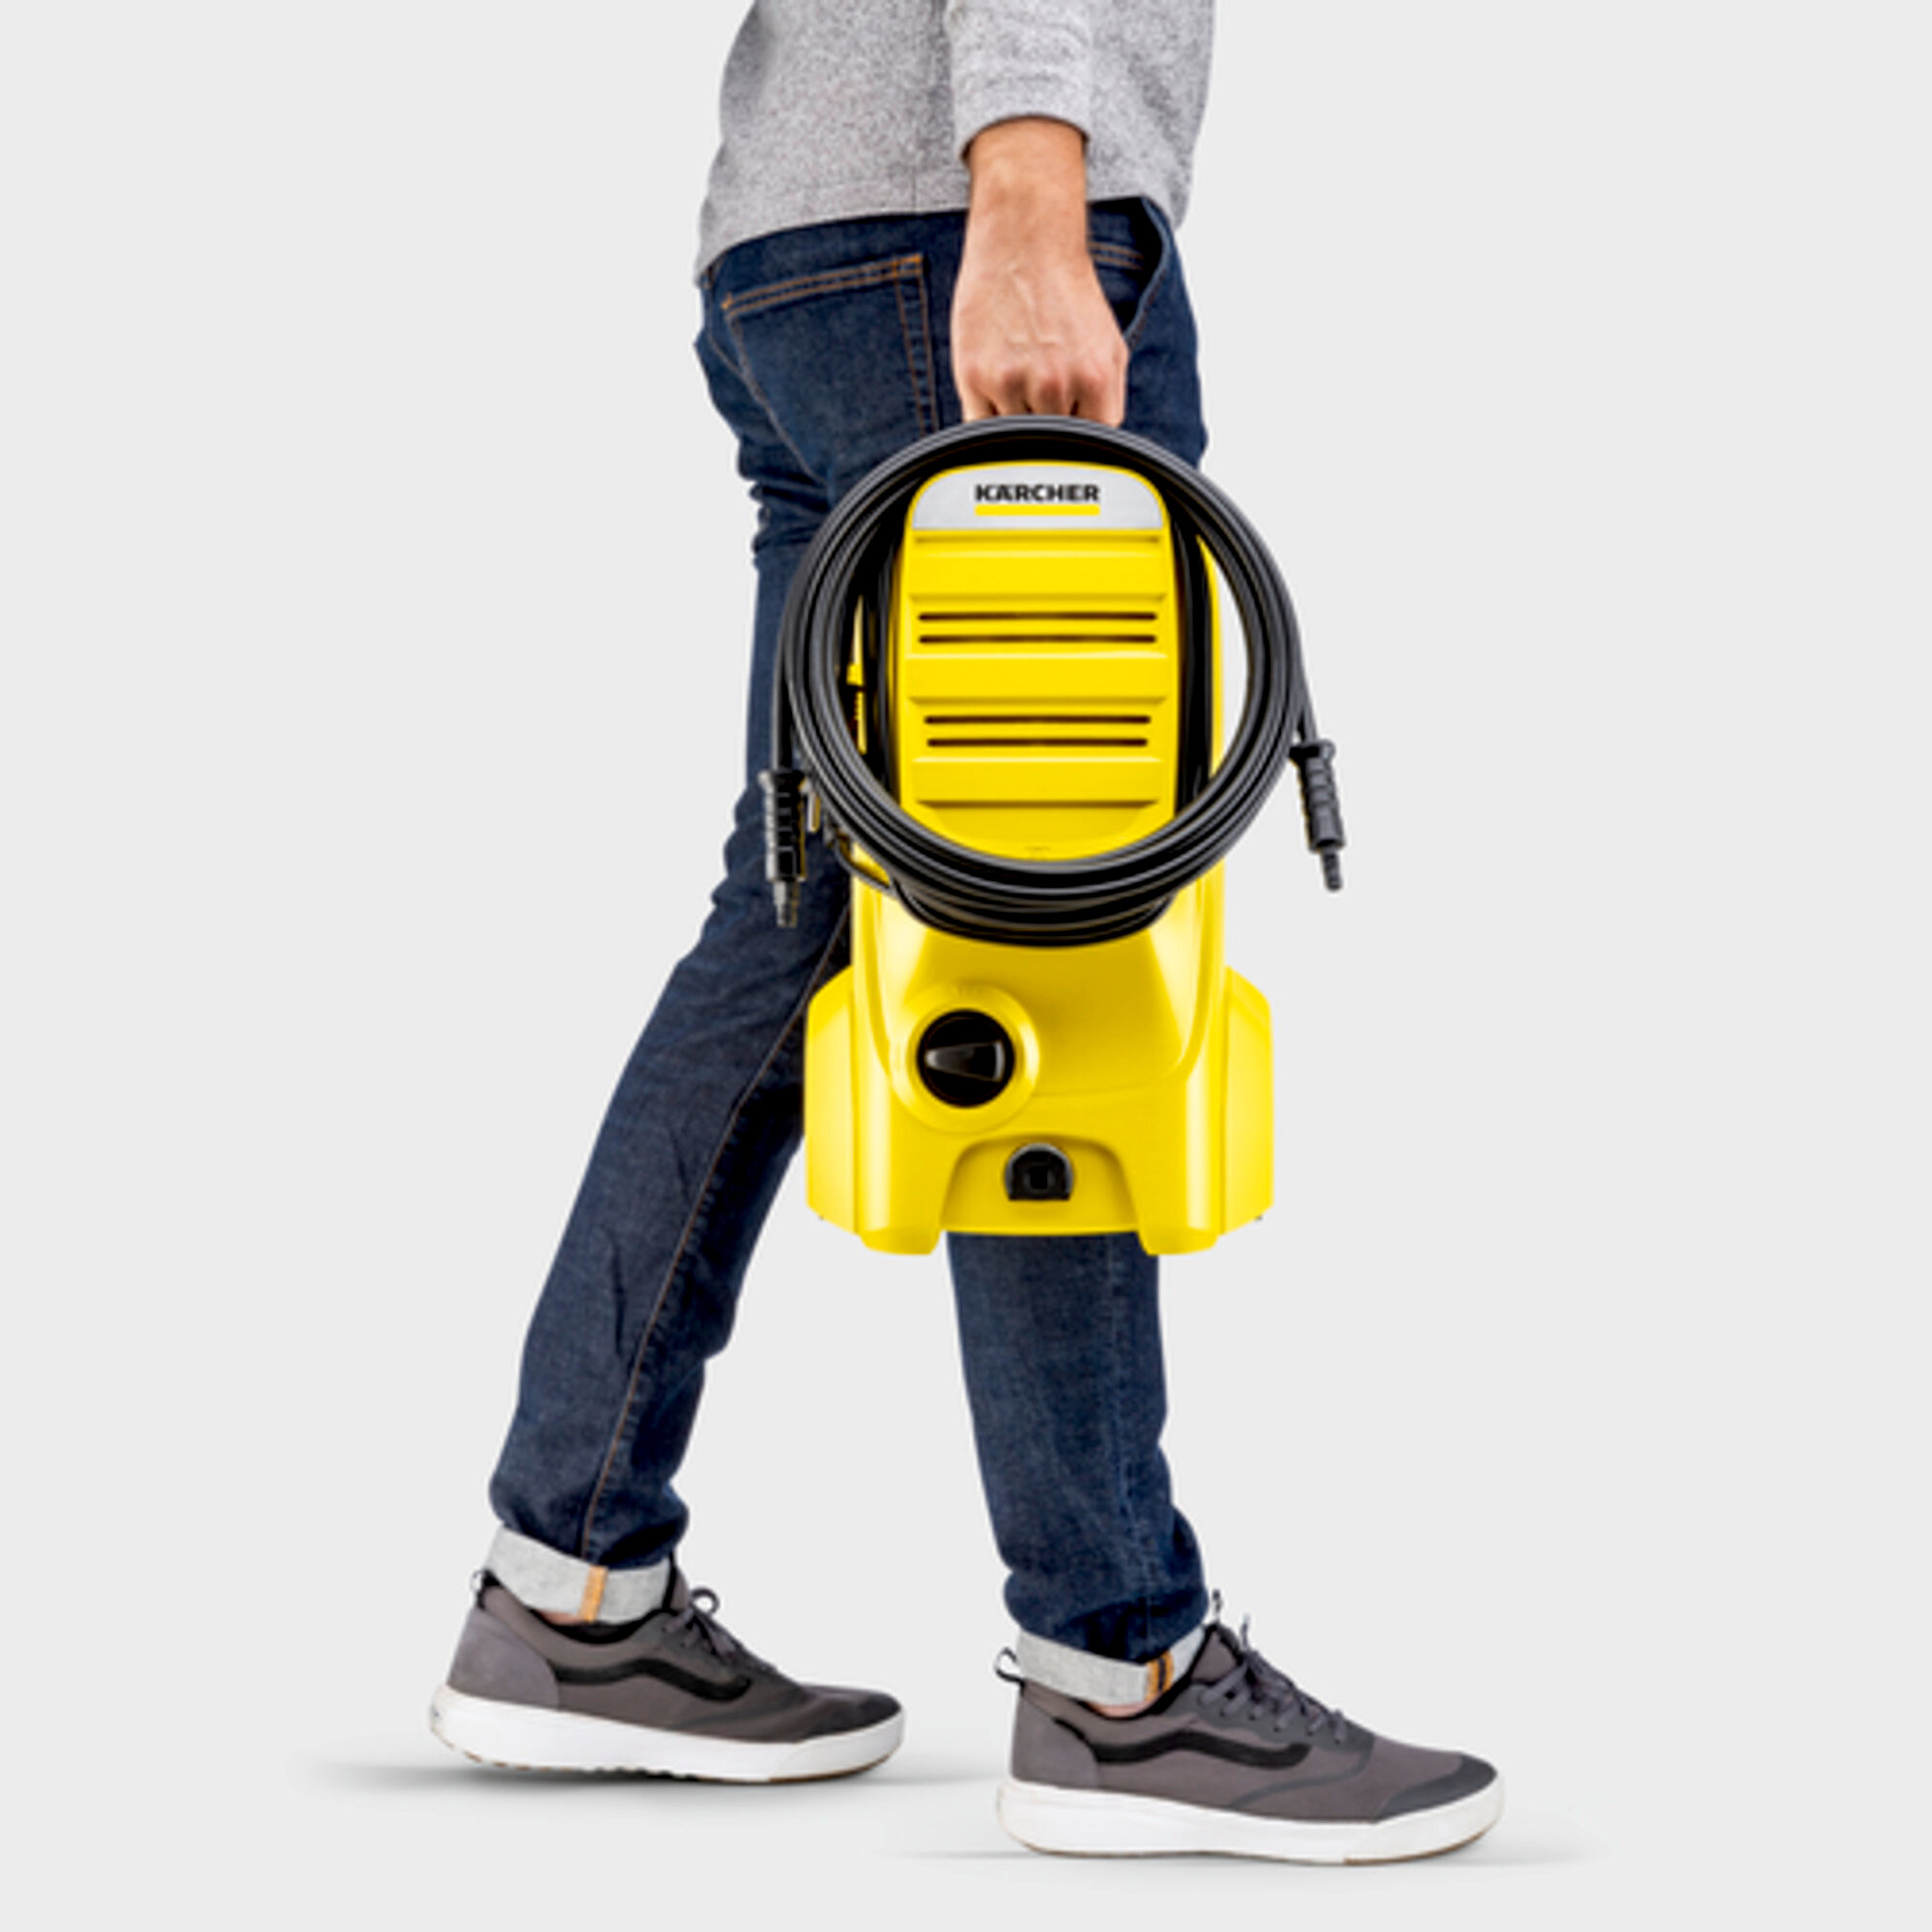 High pressure washer K 3 Compact: Compact and lightweight device